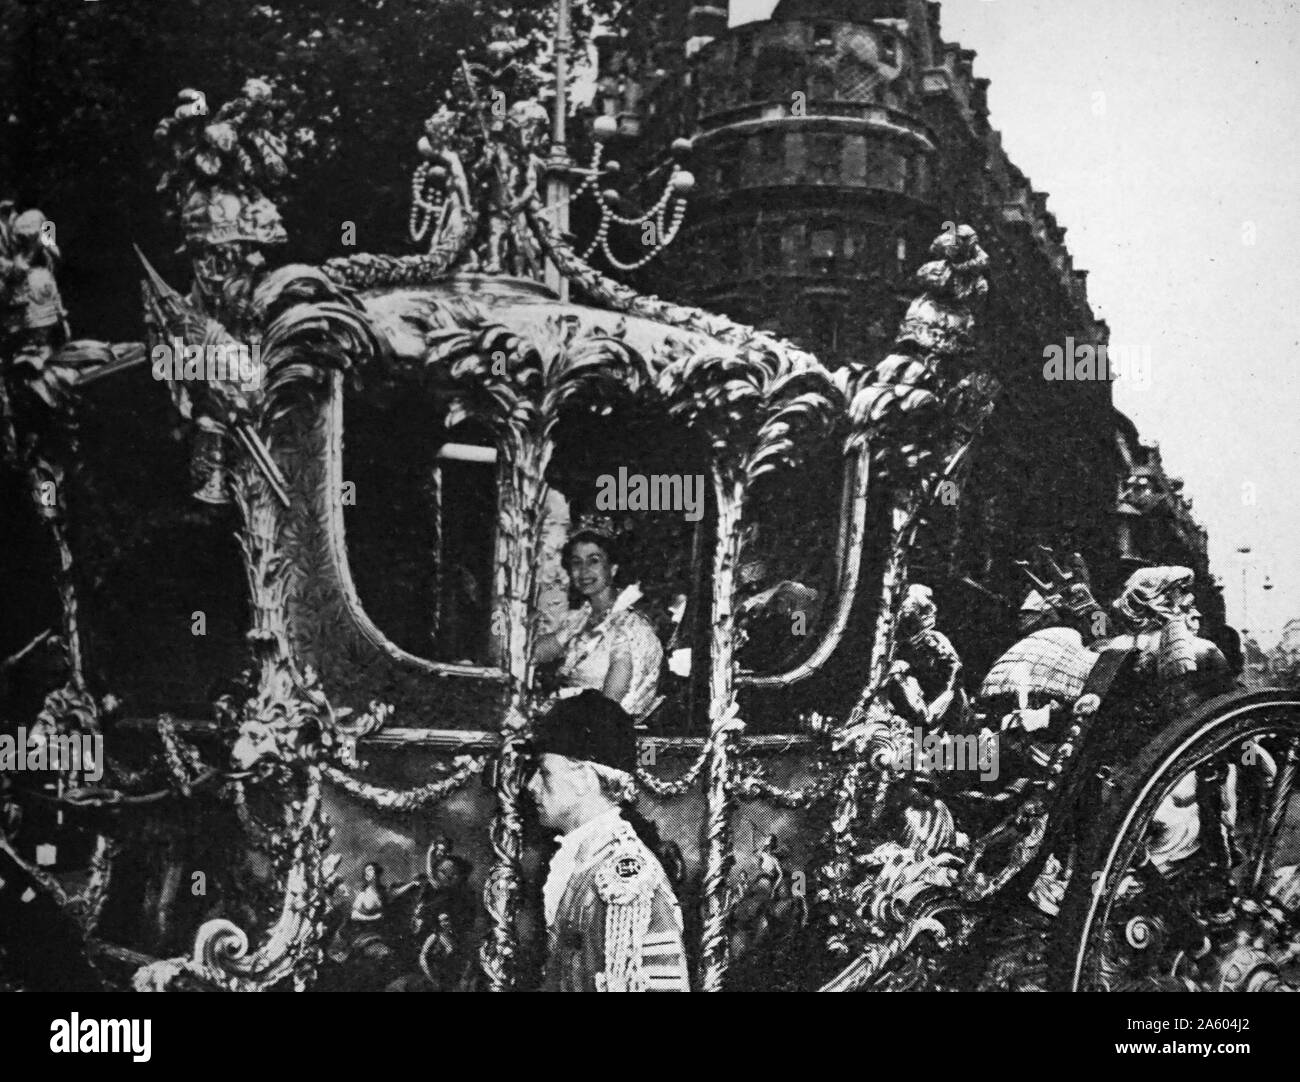 Photograph of the Queen Elizabeth II (1926-) within the Glass Coach, renovated for the Queen's crowning Stock Photo